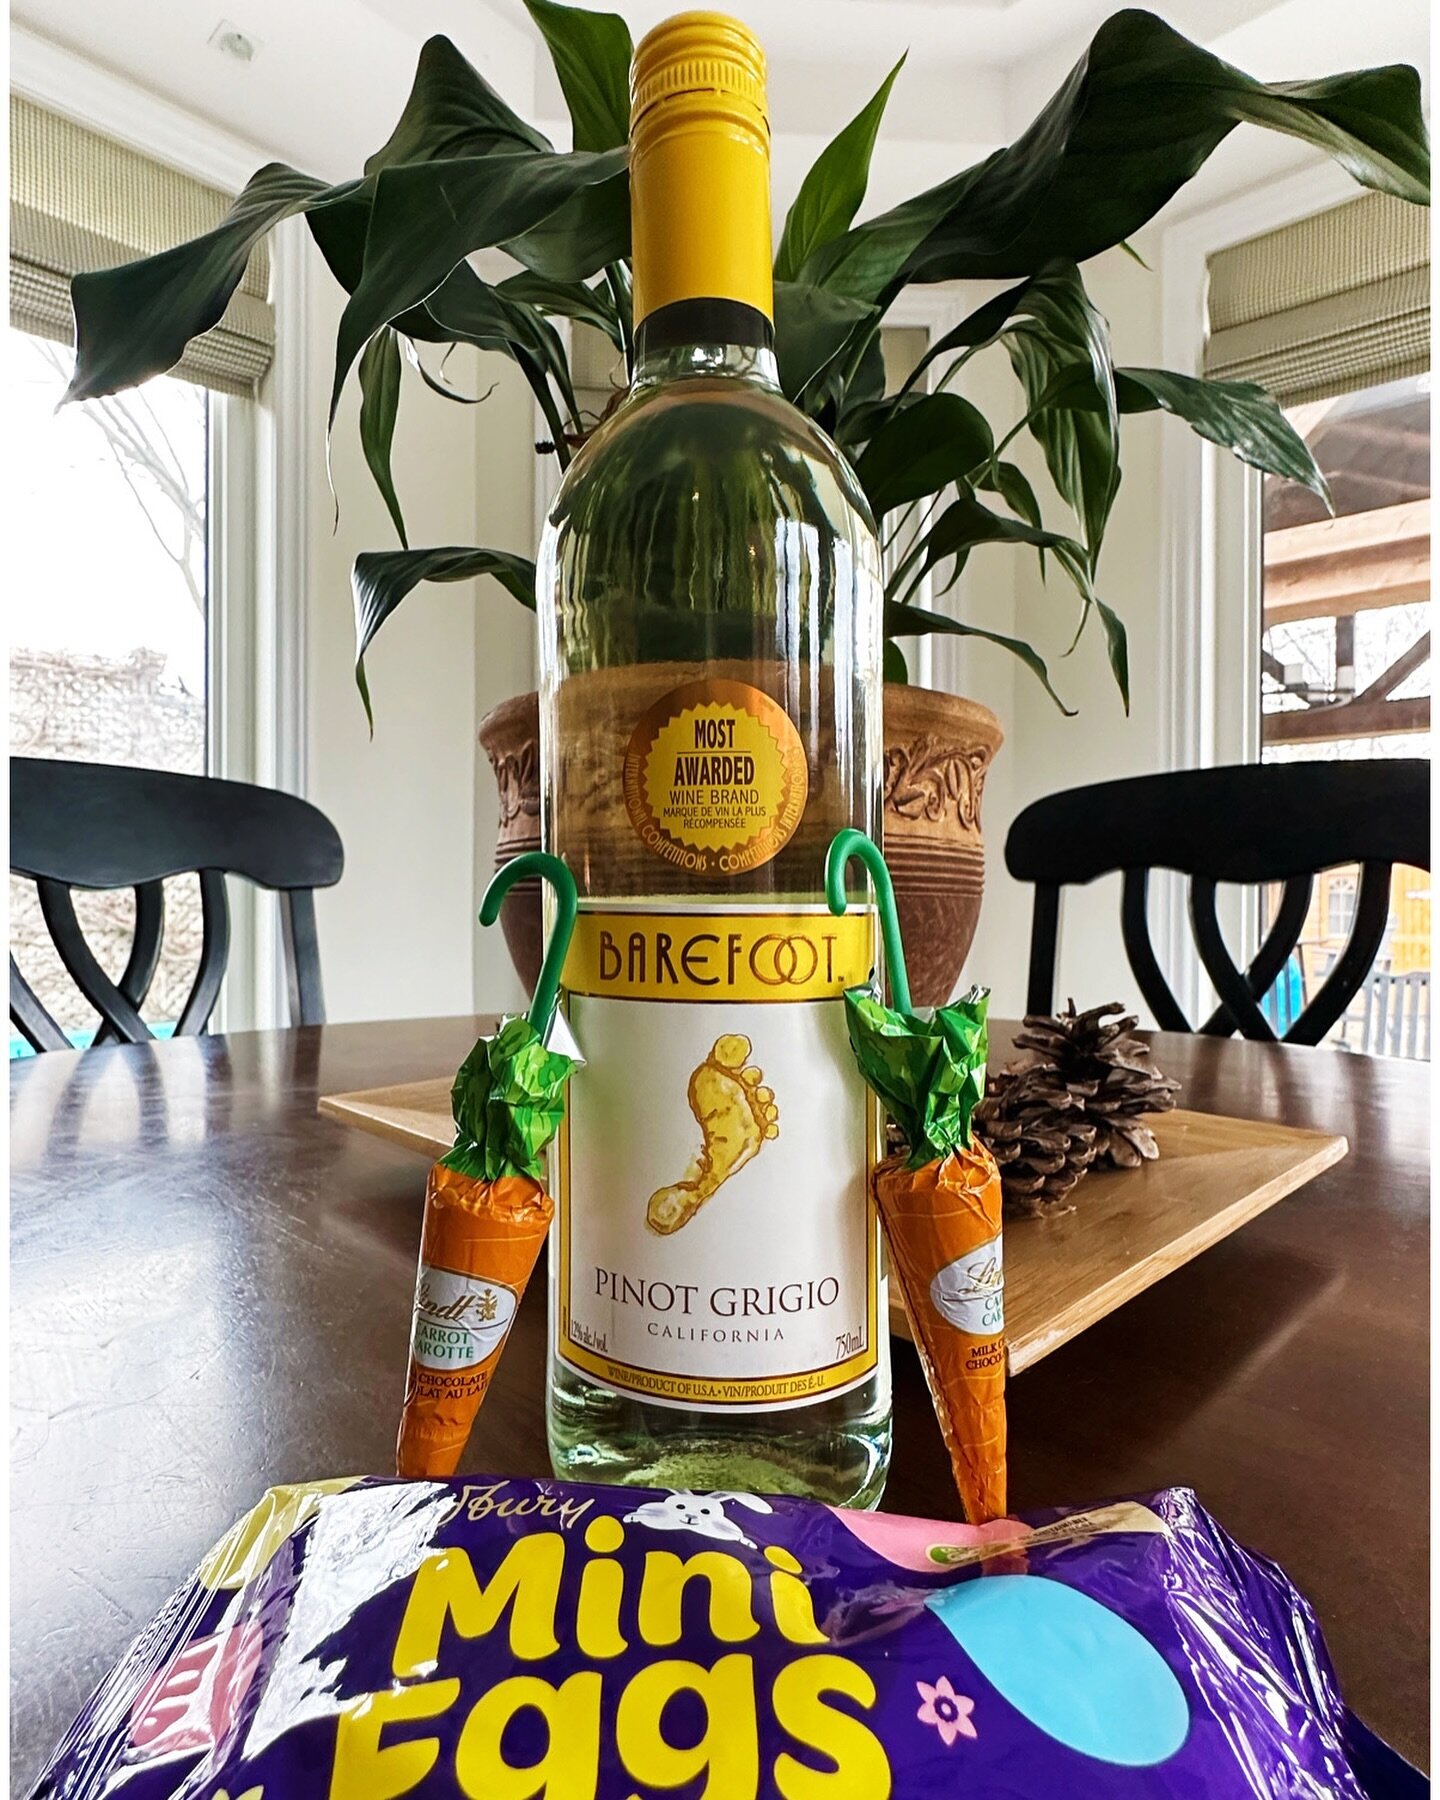 Because the #EasterBunny thinks about momma too :)
Happy Easter!

#easter #wine #winelover #winelovers #chocolate #barefootwine #cadbury #lindtchocolate #lindt